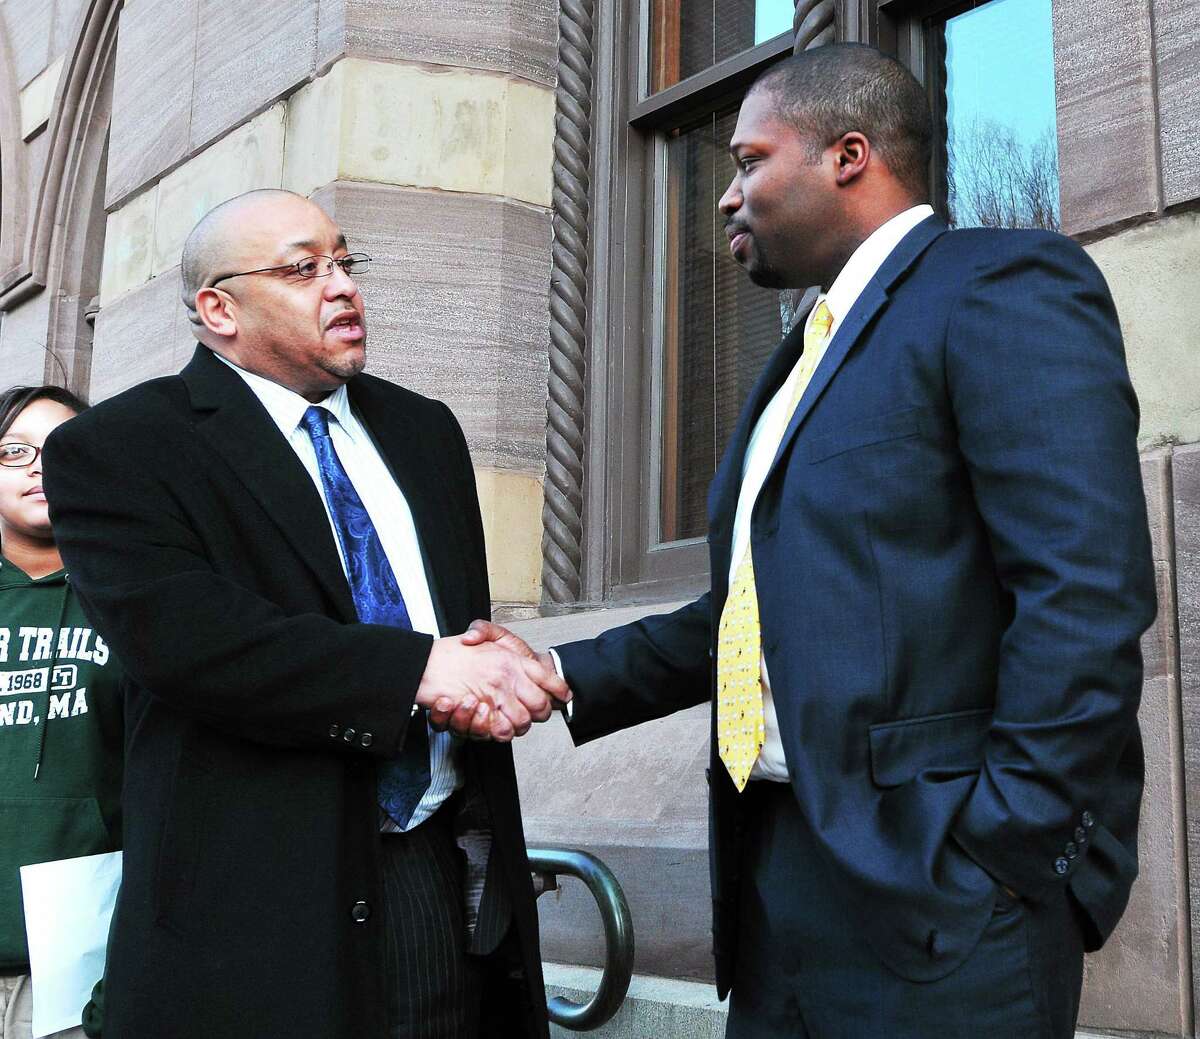 (Peter Casolino ó New Haven Register) Gary Holder-Windfield, right, gets a handshake from Darnell Goldson, after Goldson removed himself from the 10th district senate race in Connecticut. The two met outside New Haven City hall. Holder-Windfield is seeking the senate seat, formerly held by Toni Harp. pcasolino@NewHavenRegister